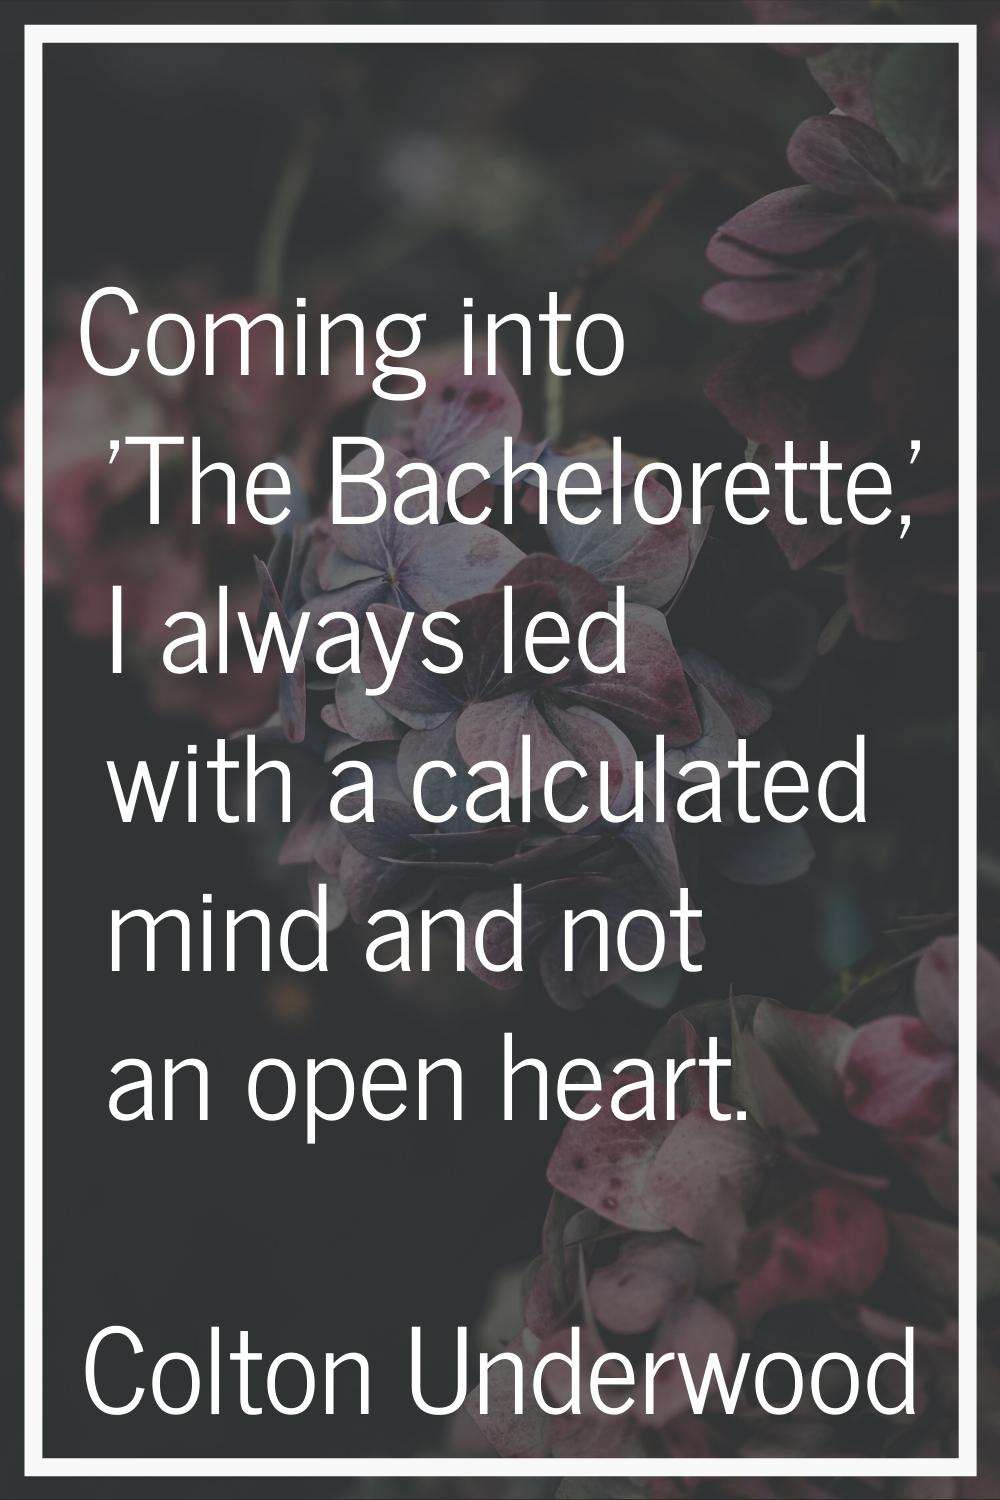 Coming into 'The Bachelorette,' I always led with a calculated mind and not an open heart.